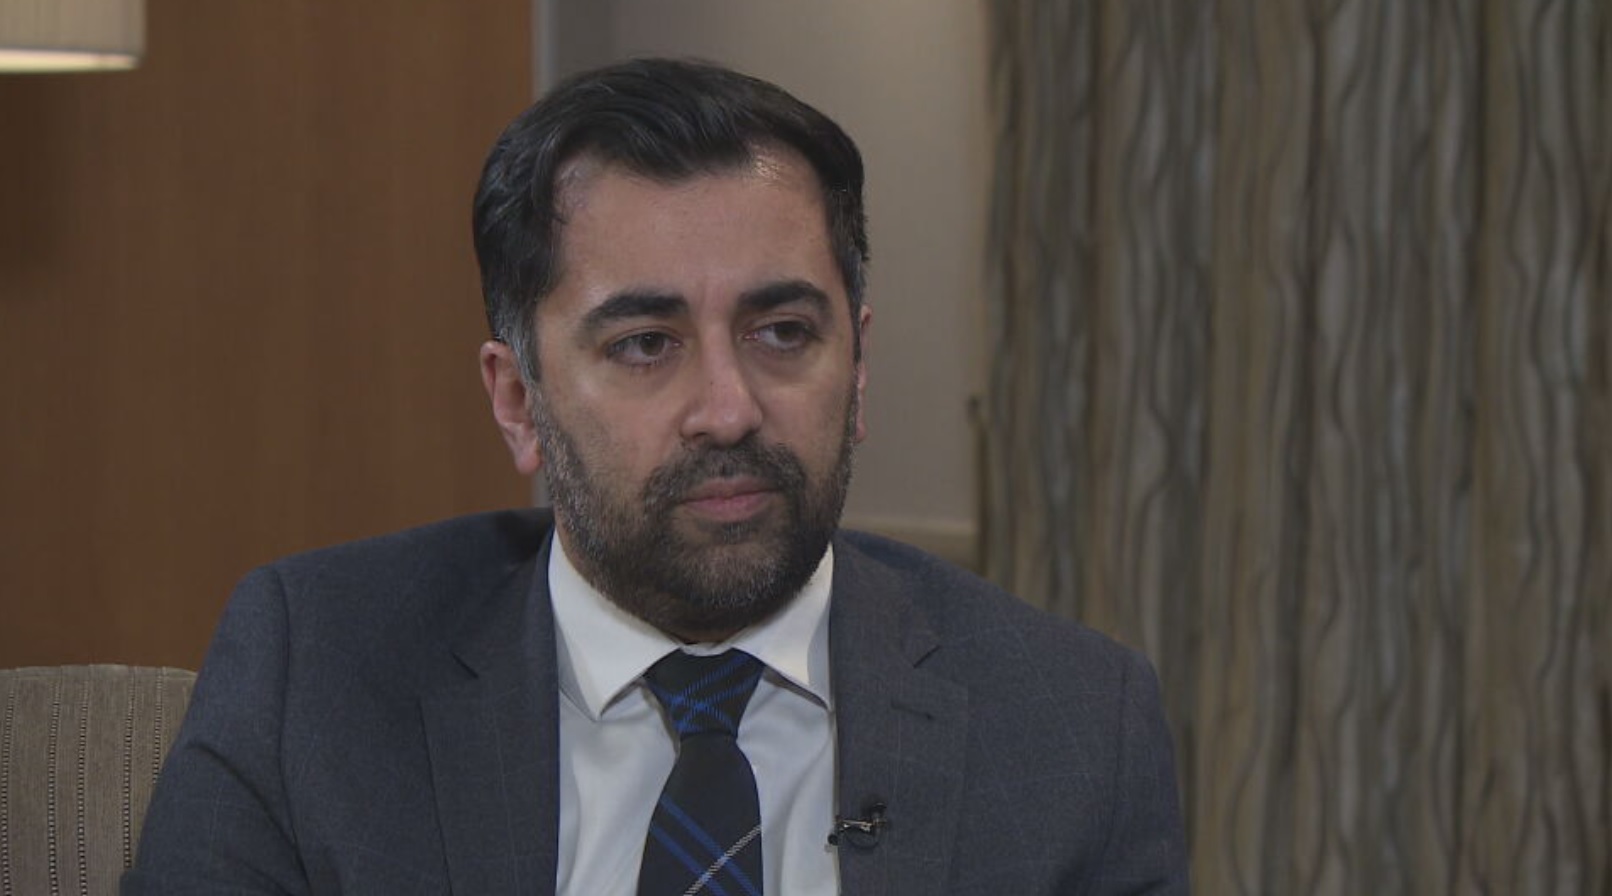 Humza Yousaf has denied missing a key vote on equal marriage on purpose.